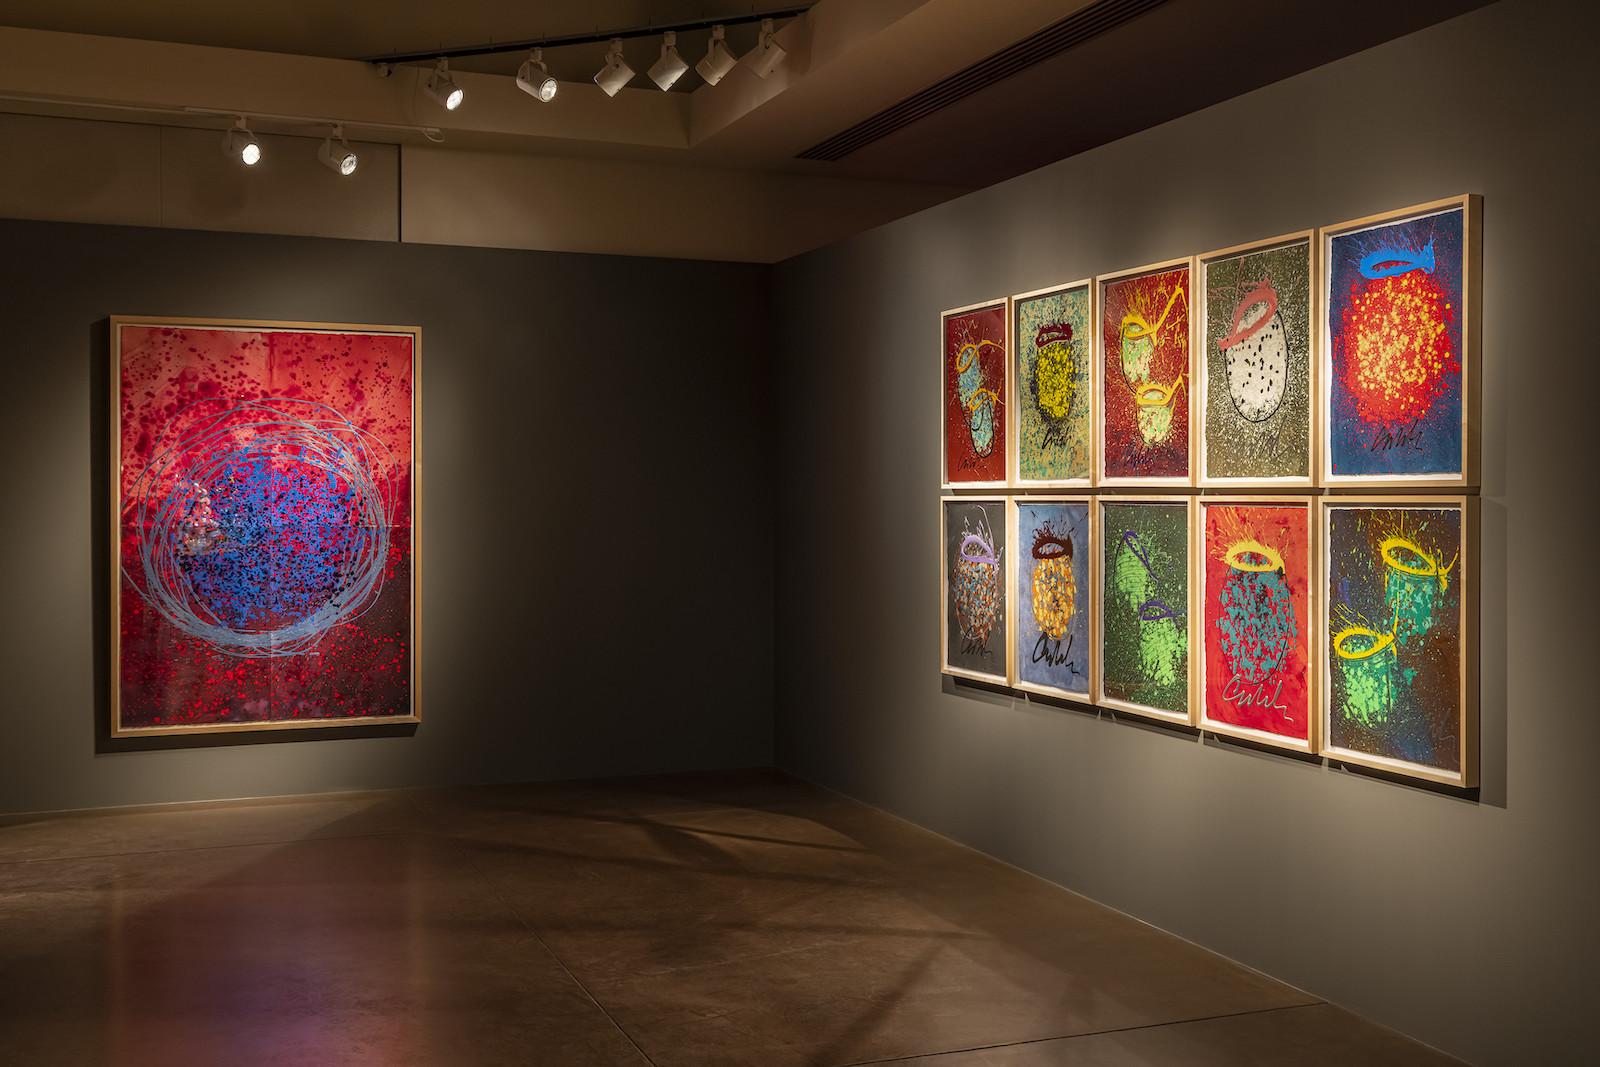 Dale Chihuly, Float Quad Drawing, 2014, and Basket Drawings, Desert Botanical Garden, Phoenix, installed 2021, Photo by Nathaniel Willson.